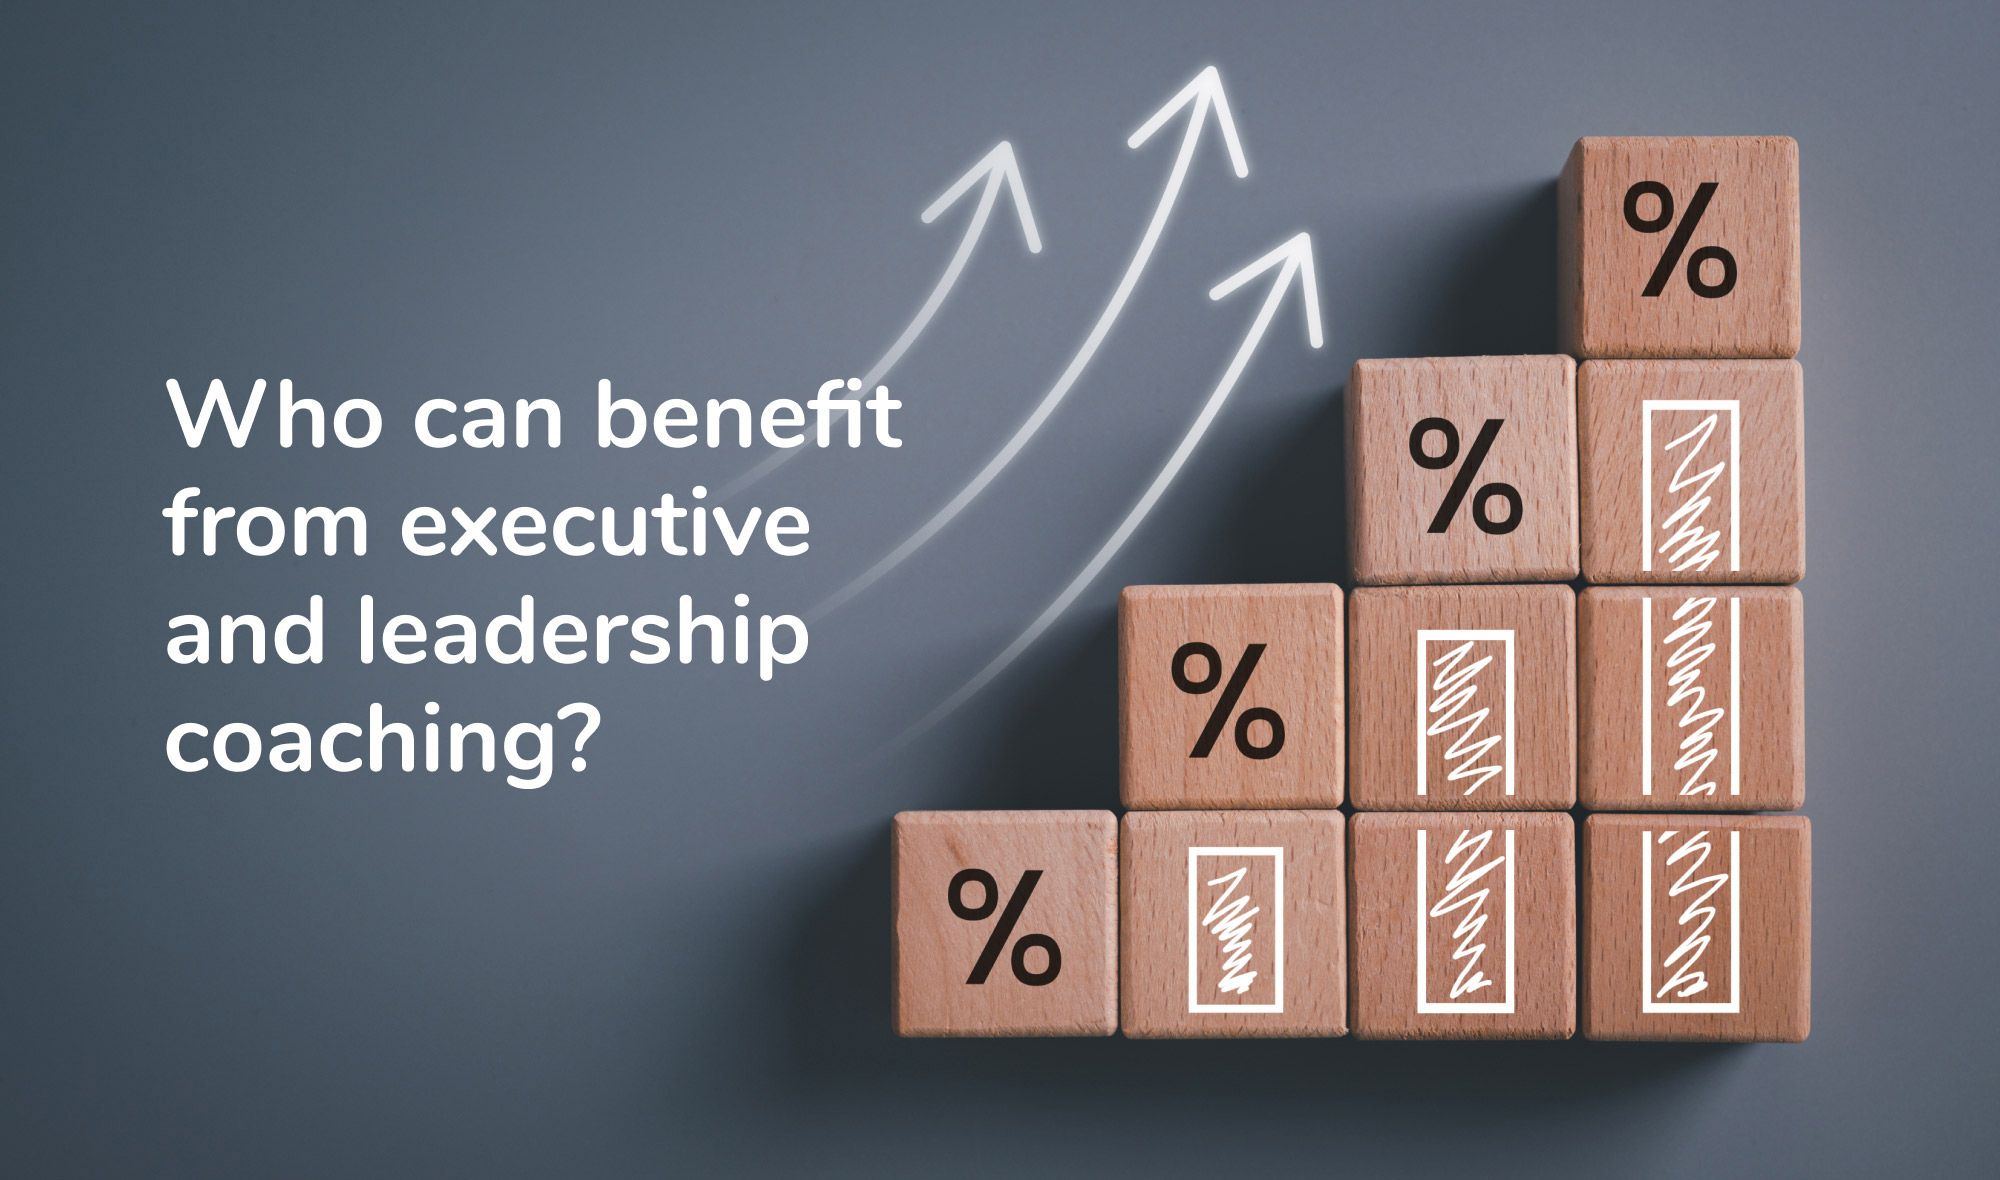 Who can benefit from executive and leadership coaching?